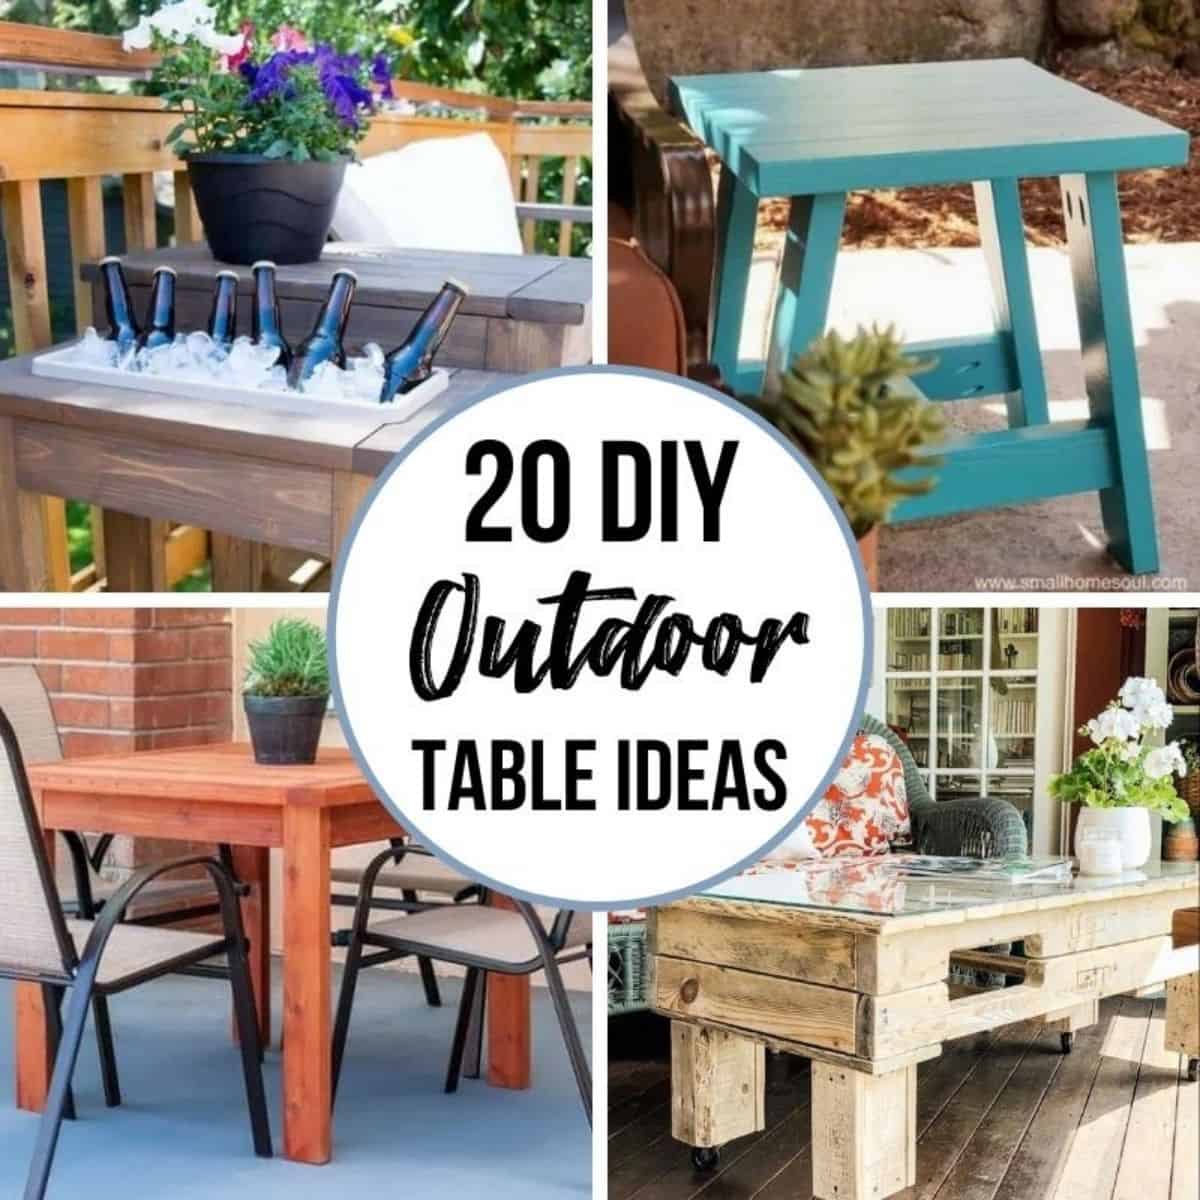 20 DIY Outdoor Table Ideas for Your Deck or Patio - The Handyman's Daughter